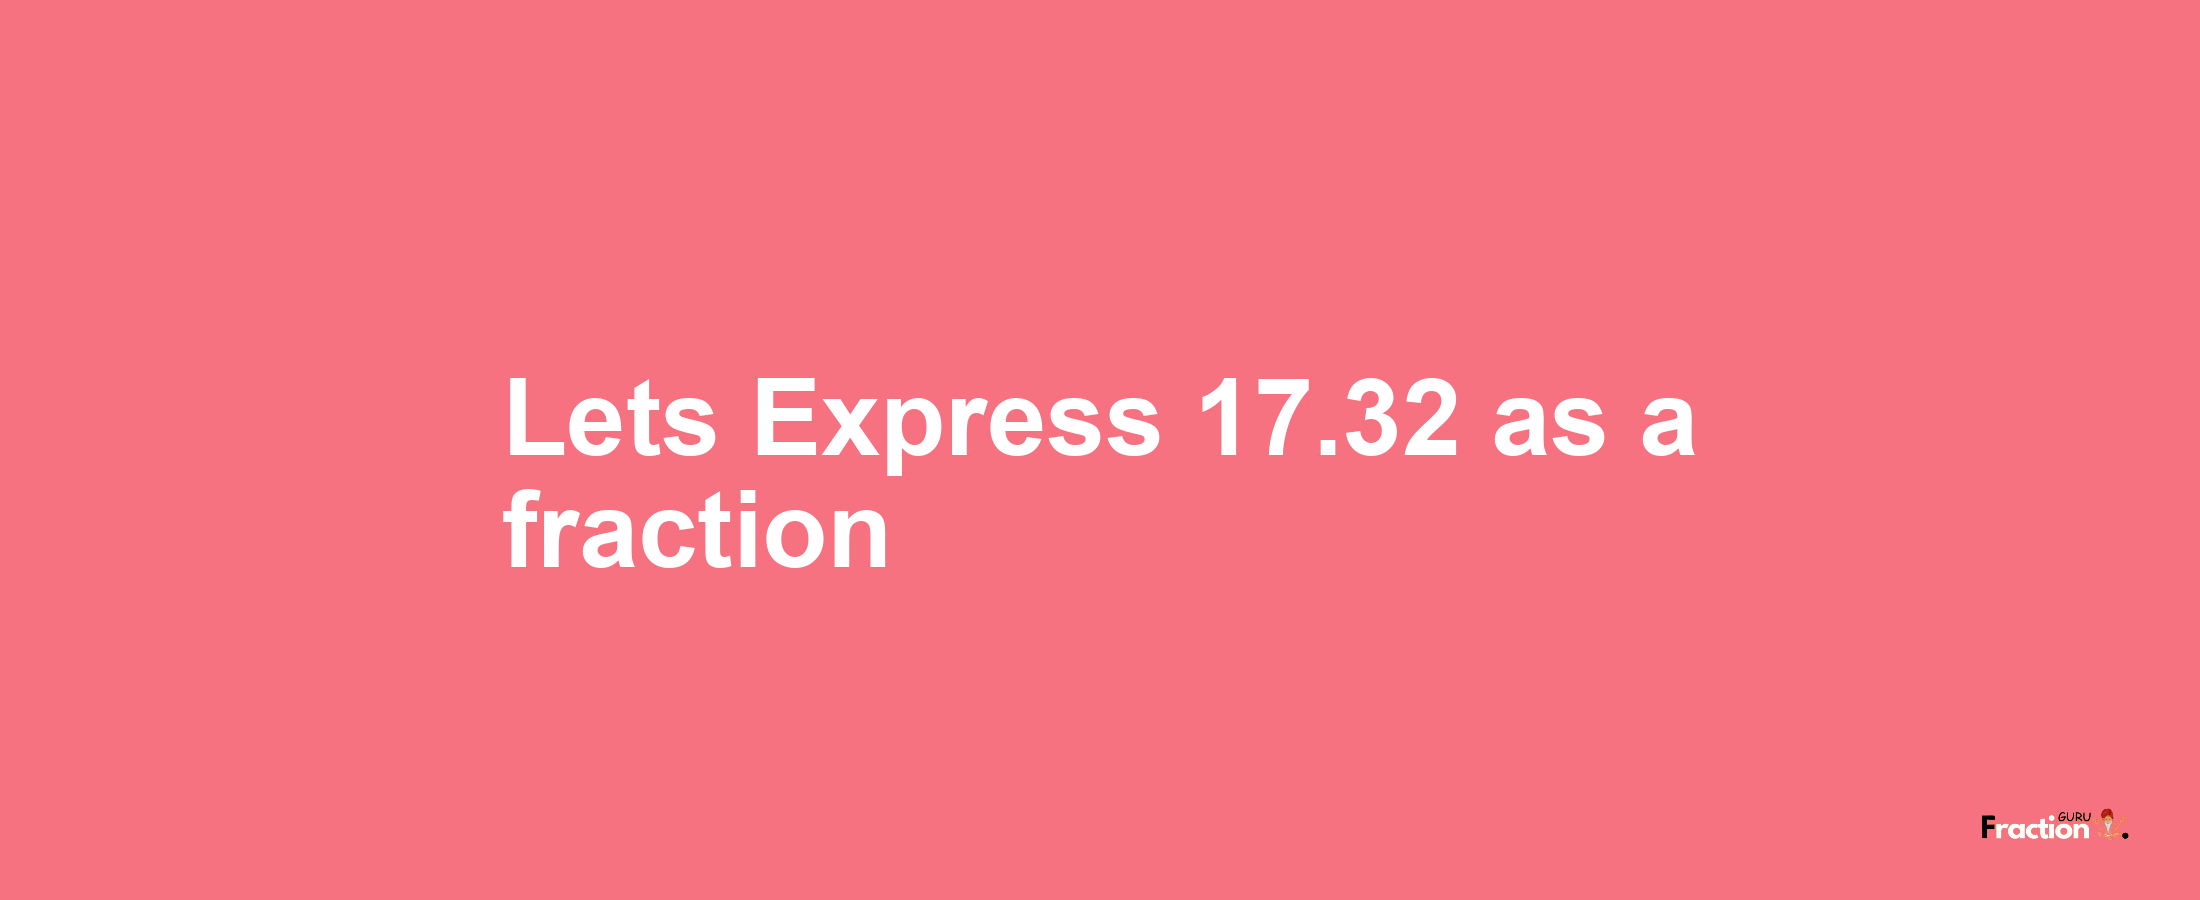 Lets Express 17.32 as afraction